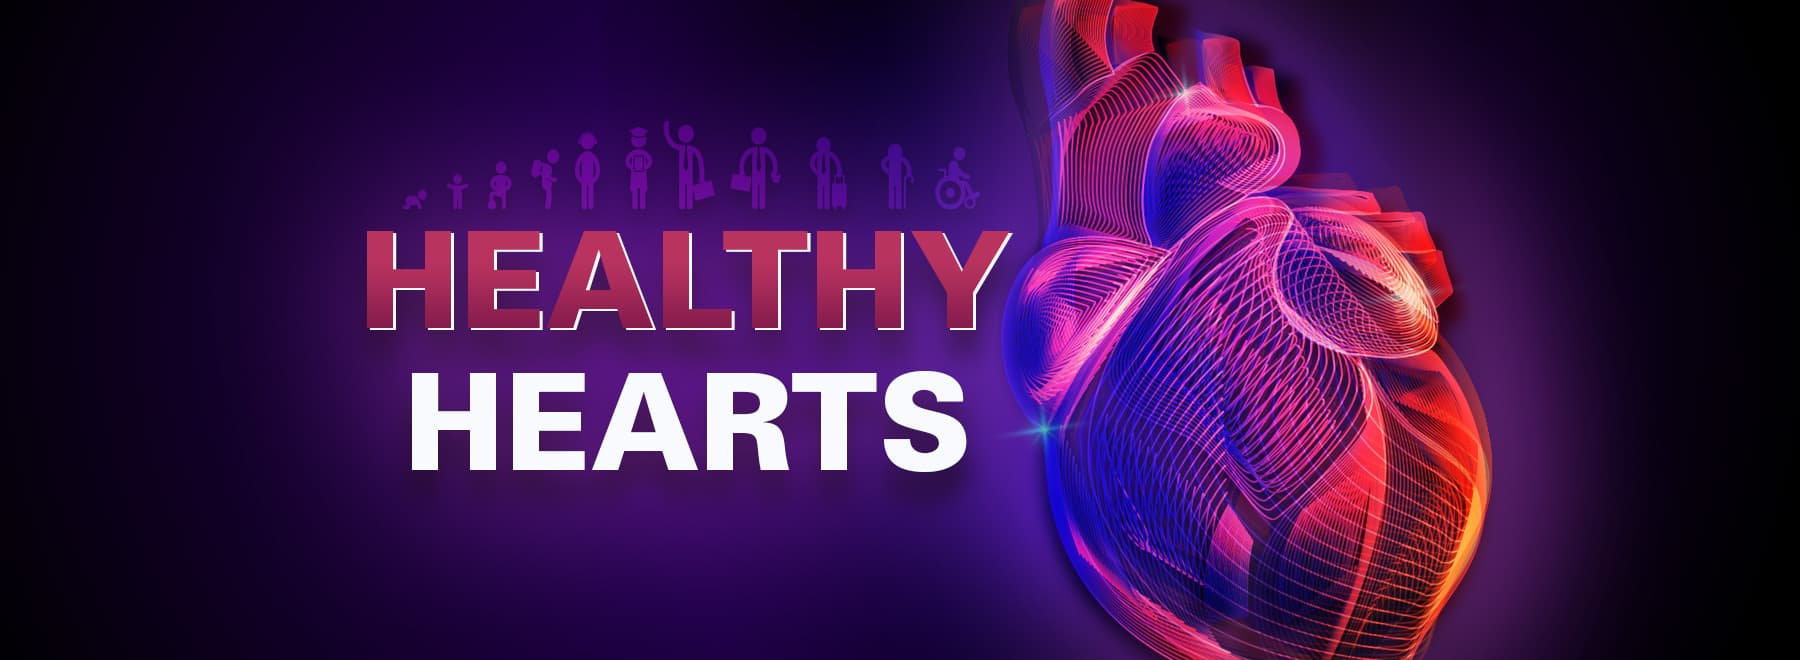 Xray image of heart with title Healthy Heartss